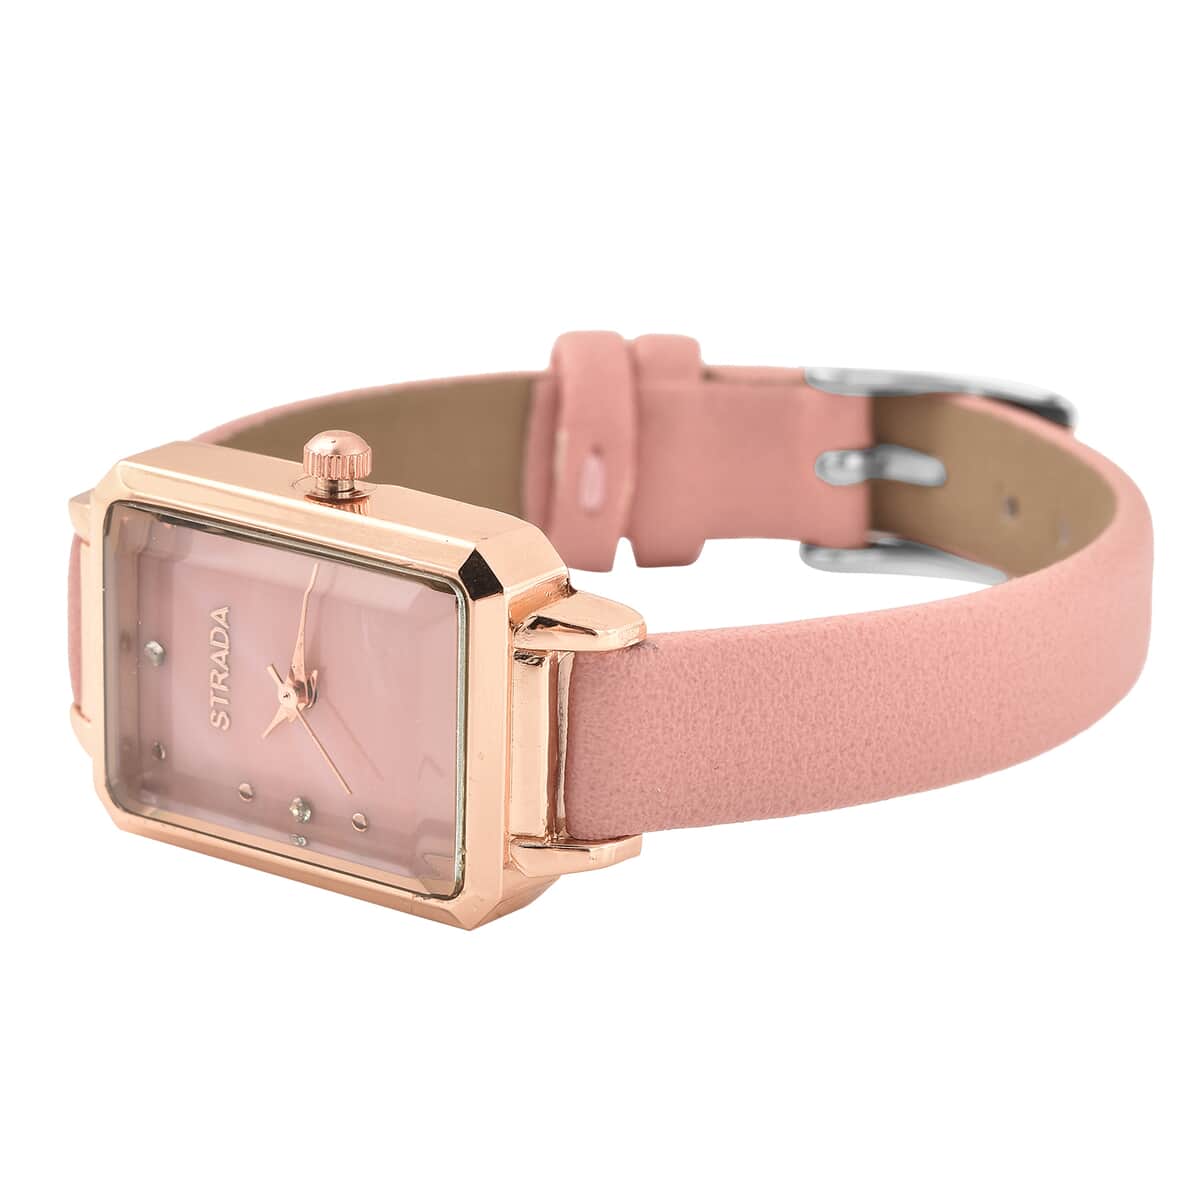 Strada Austrian Crystal Japanese Movement Watch with Pink Faux Leather Strap image number 3